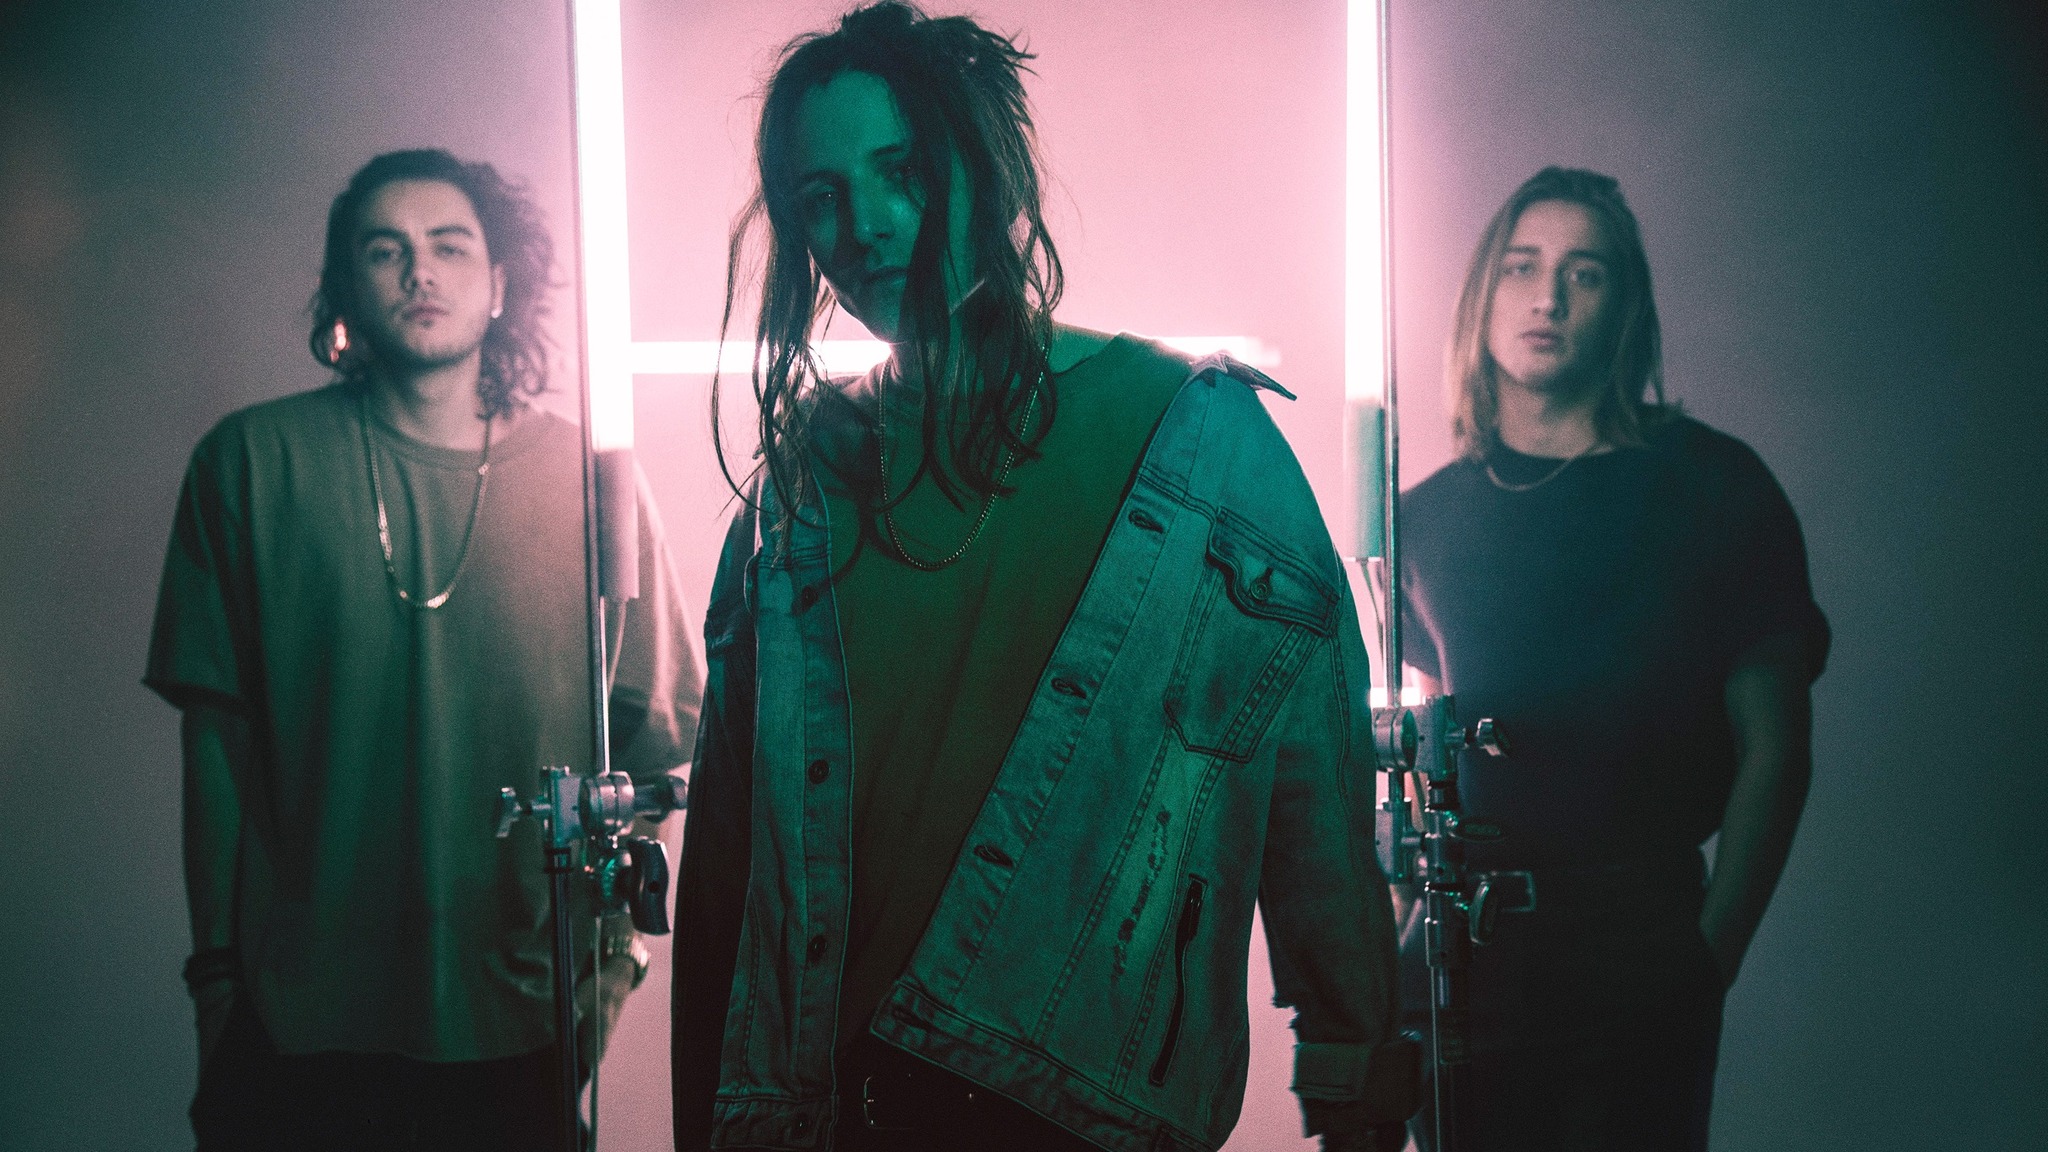 Ones To Watch and The Noise Present: Chase Atlantic